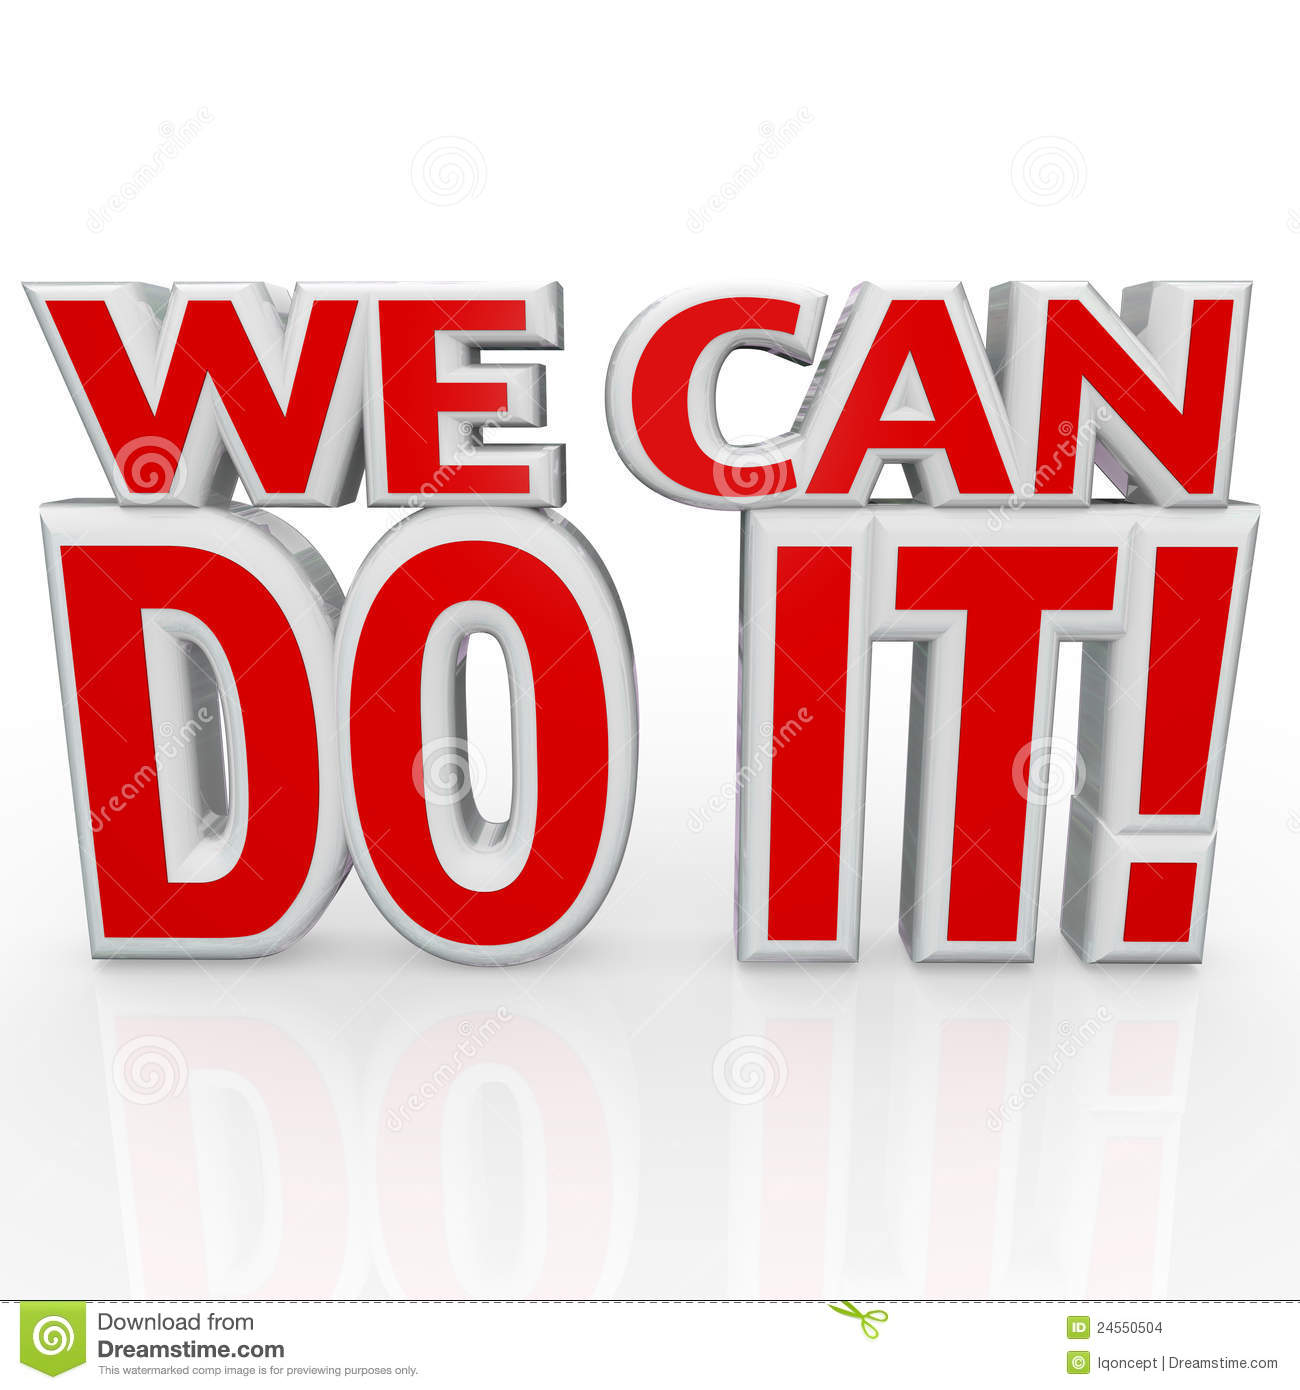 The Words We Can Do It In Red 3d Letters To Symbolize Confidence And A